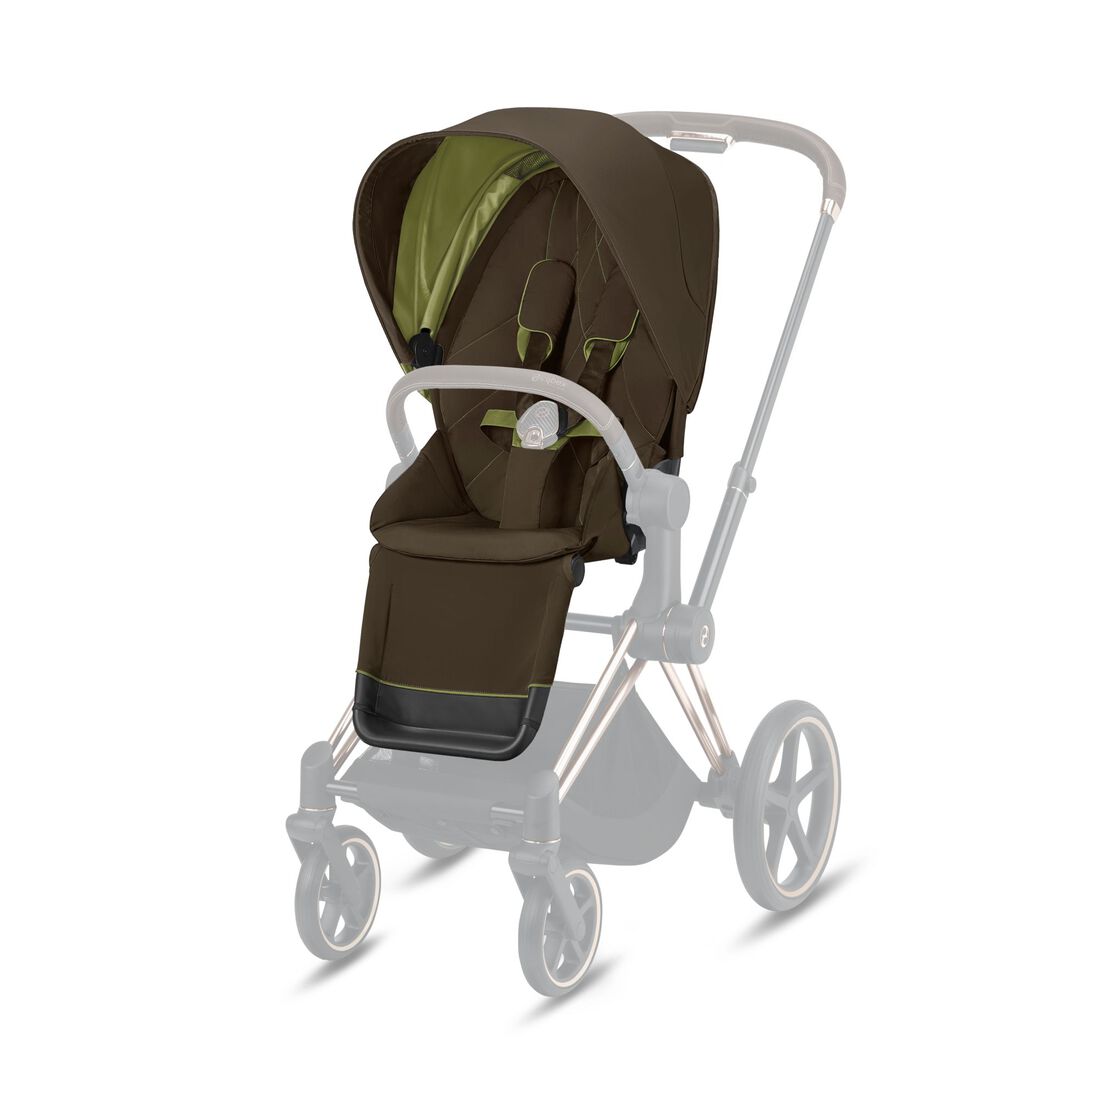 CYBEX Priam 3 Seat Pack - Khaki Green in Khaki Green large image number 1